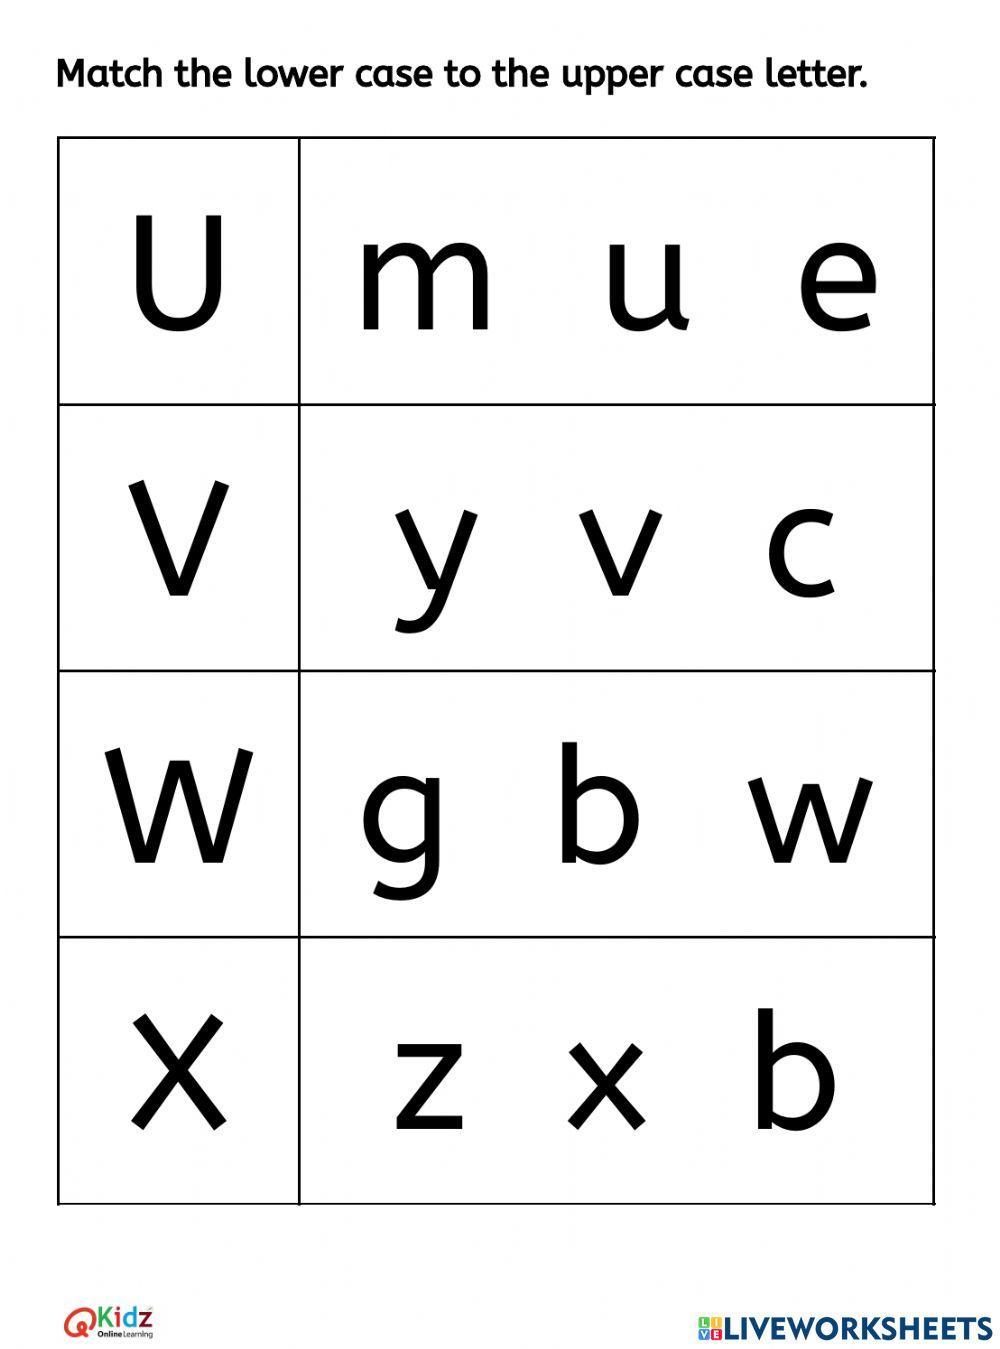 Match the Letters U V W X Y Z - Lower case to the Upper case